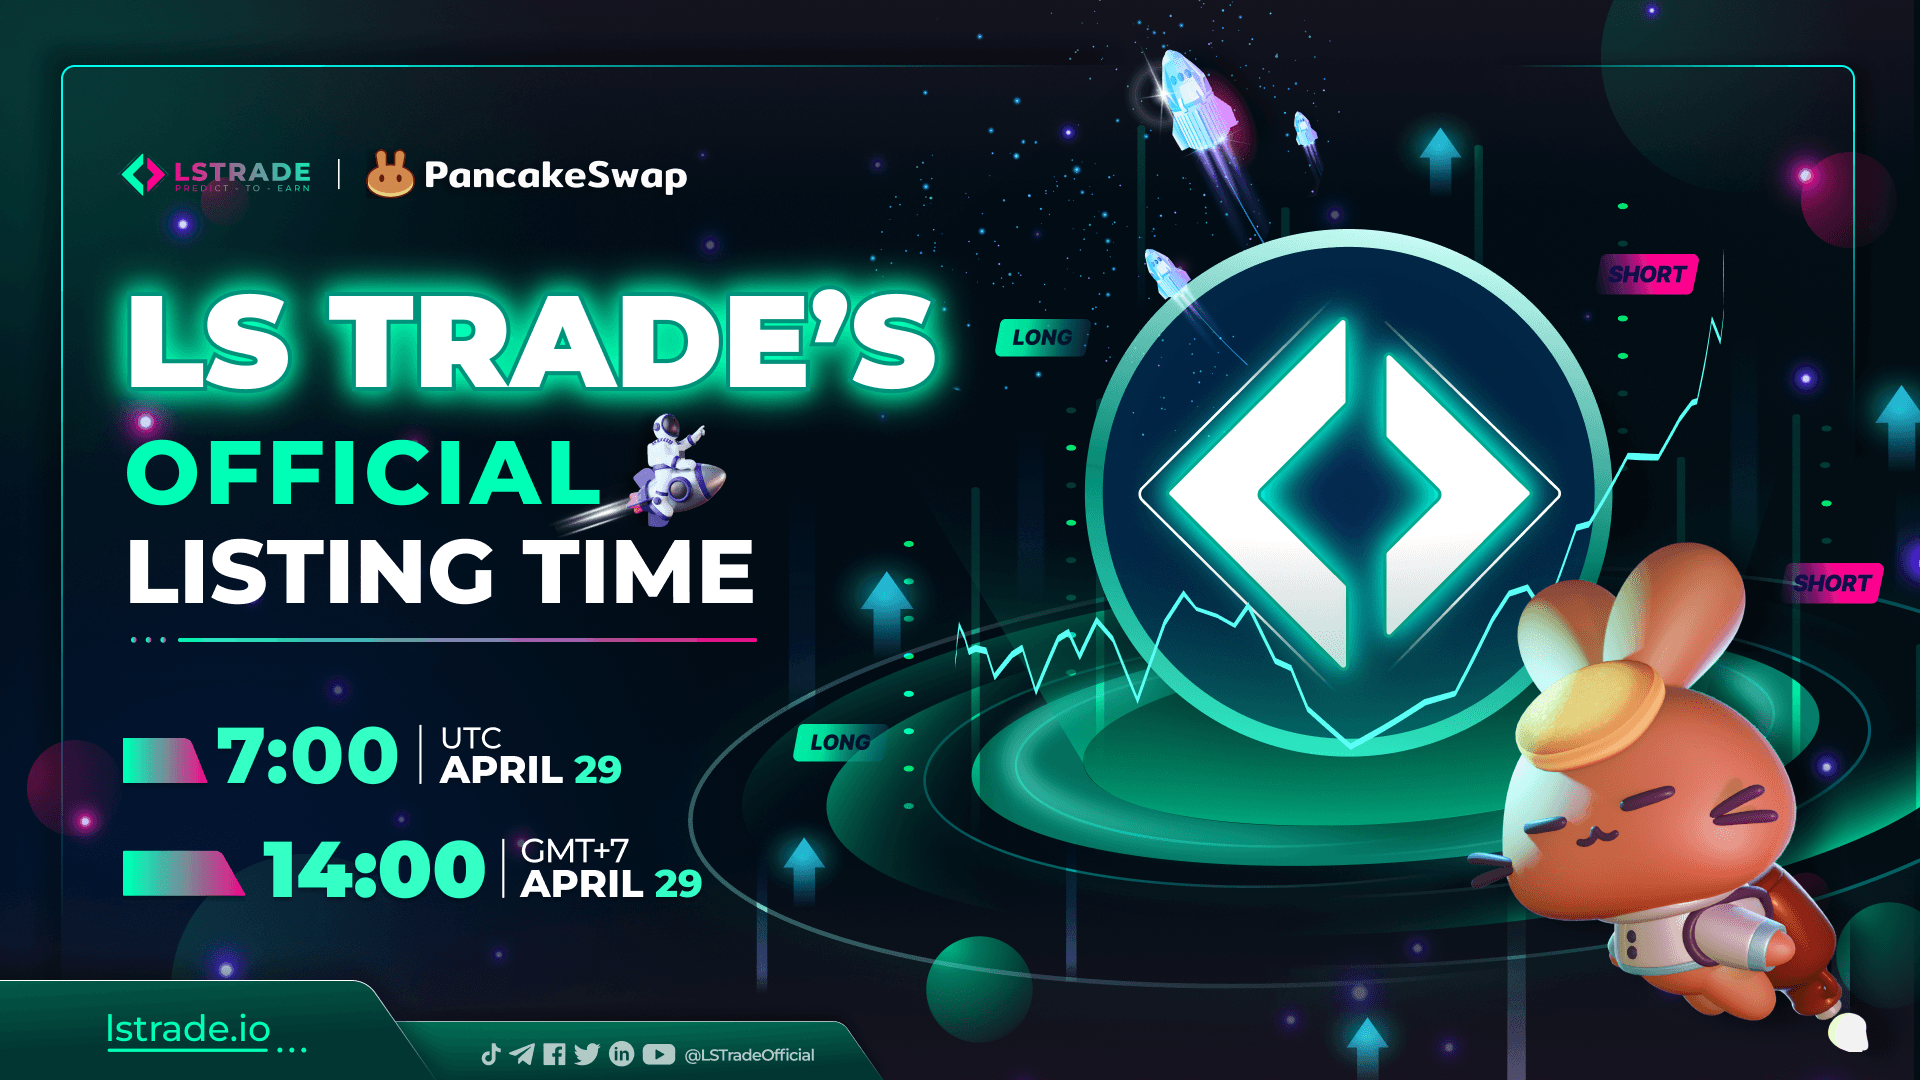 LS TRADE’S OFFICIAL LISTING TIME